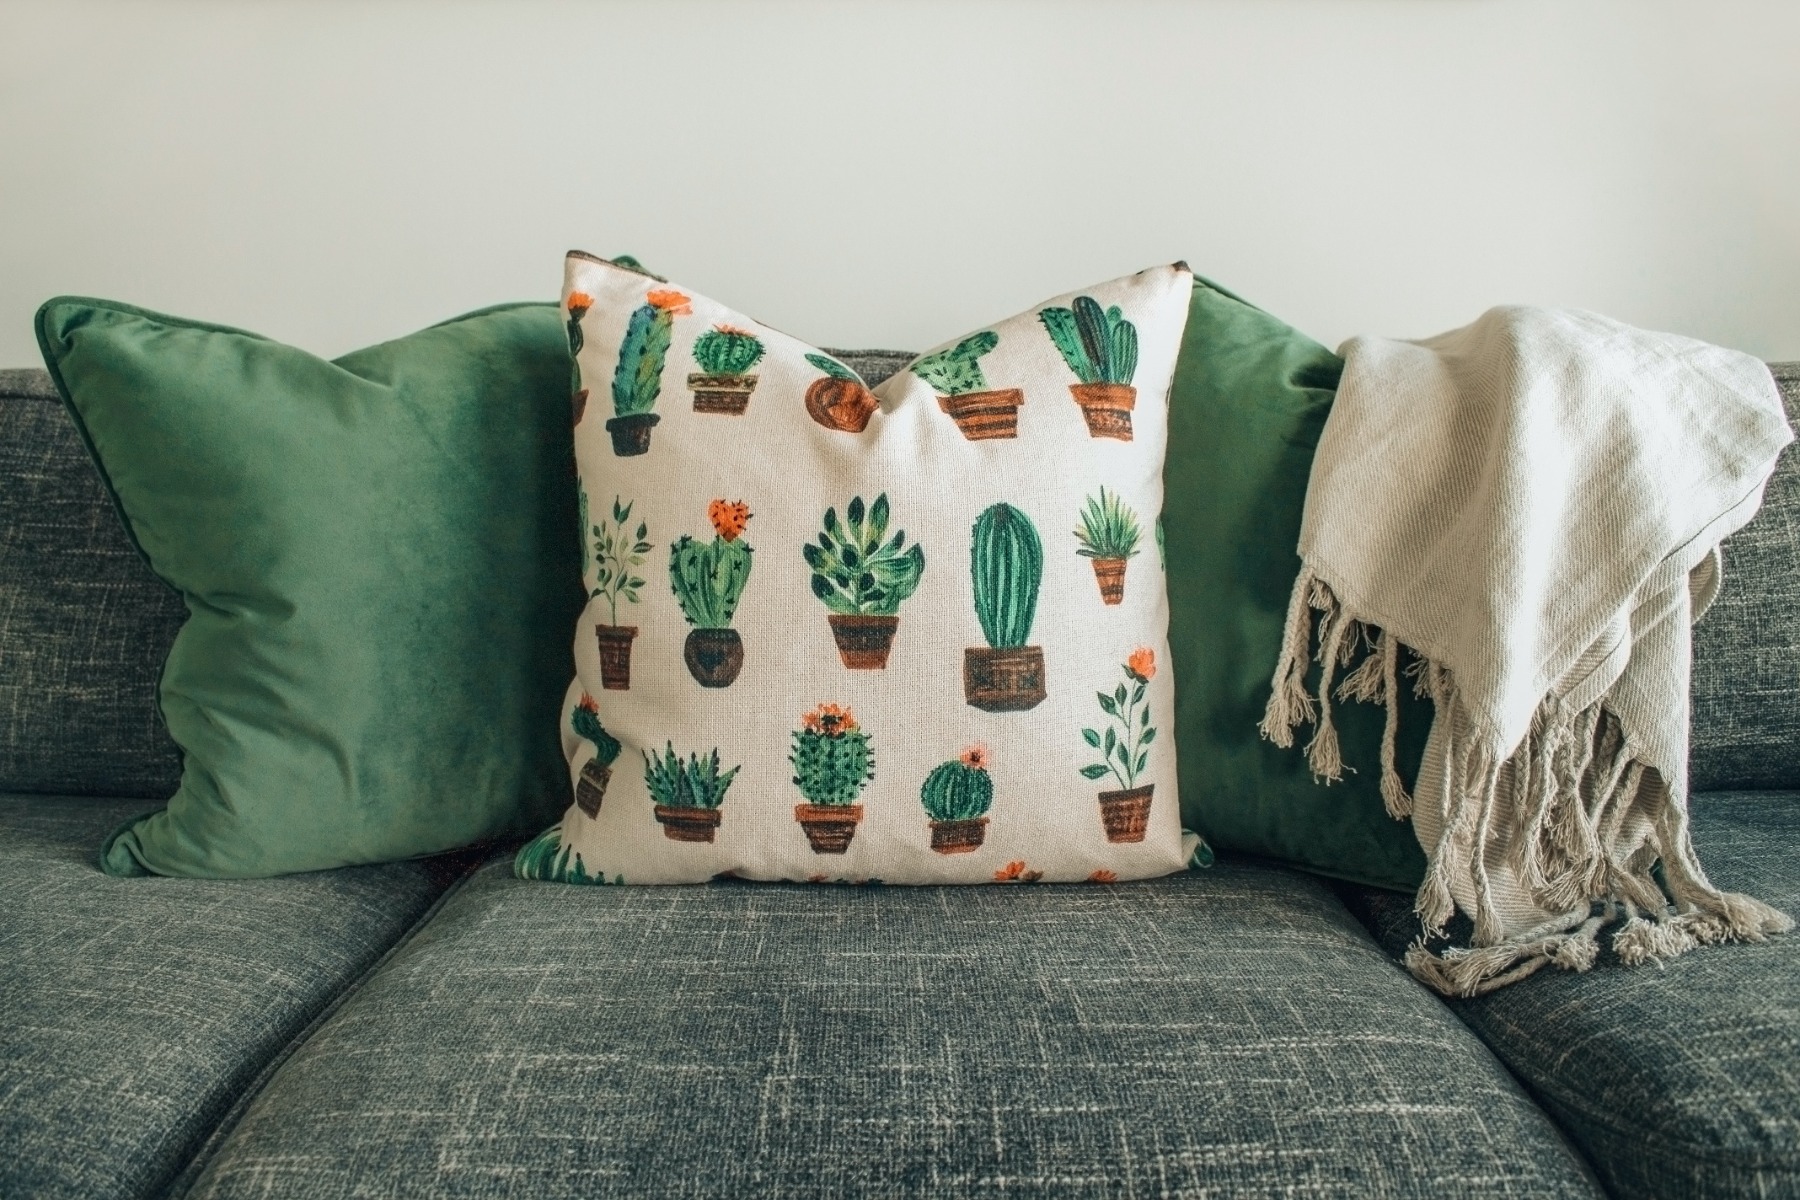 An image of cushions and a blanket on a sofa